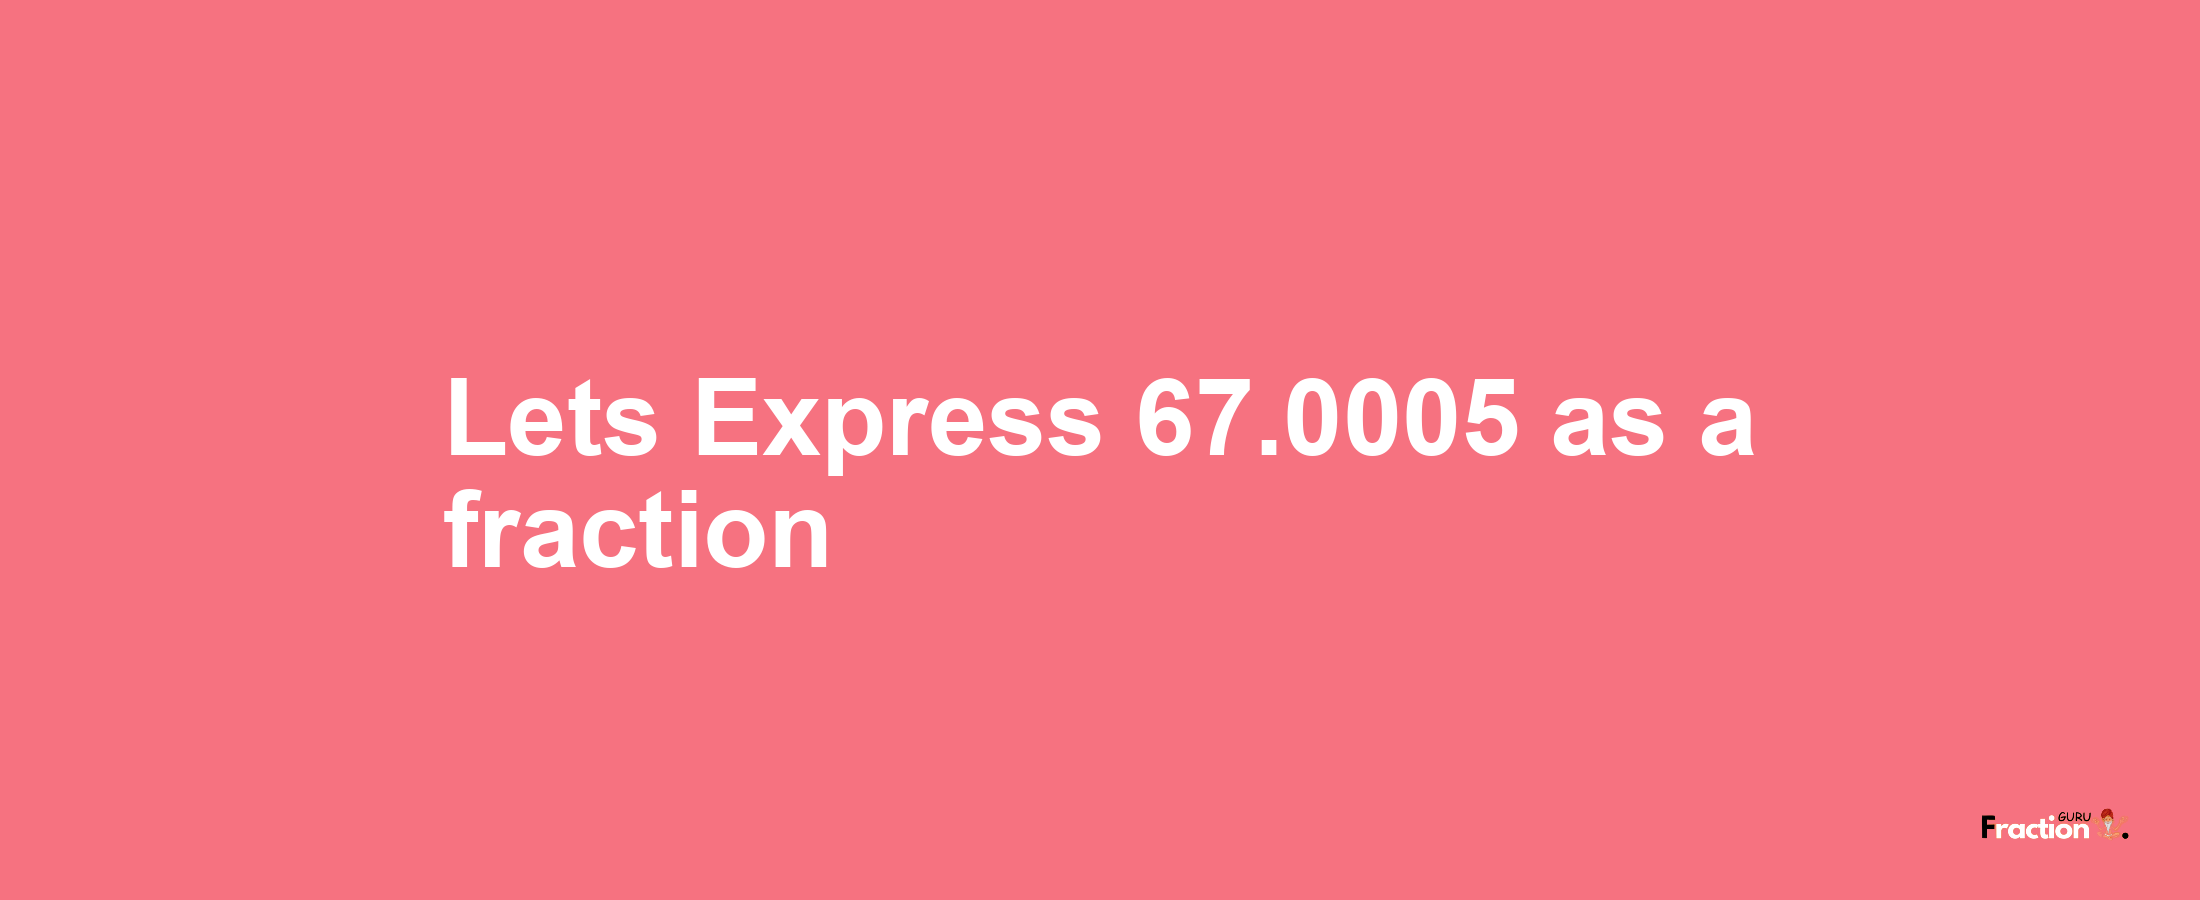 Lets Express 67.0005 as afraction